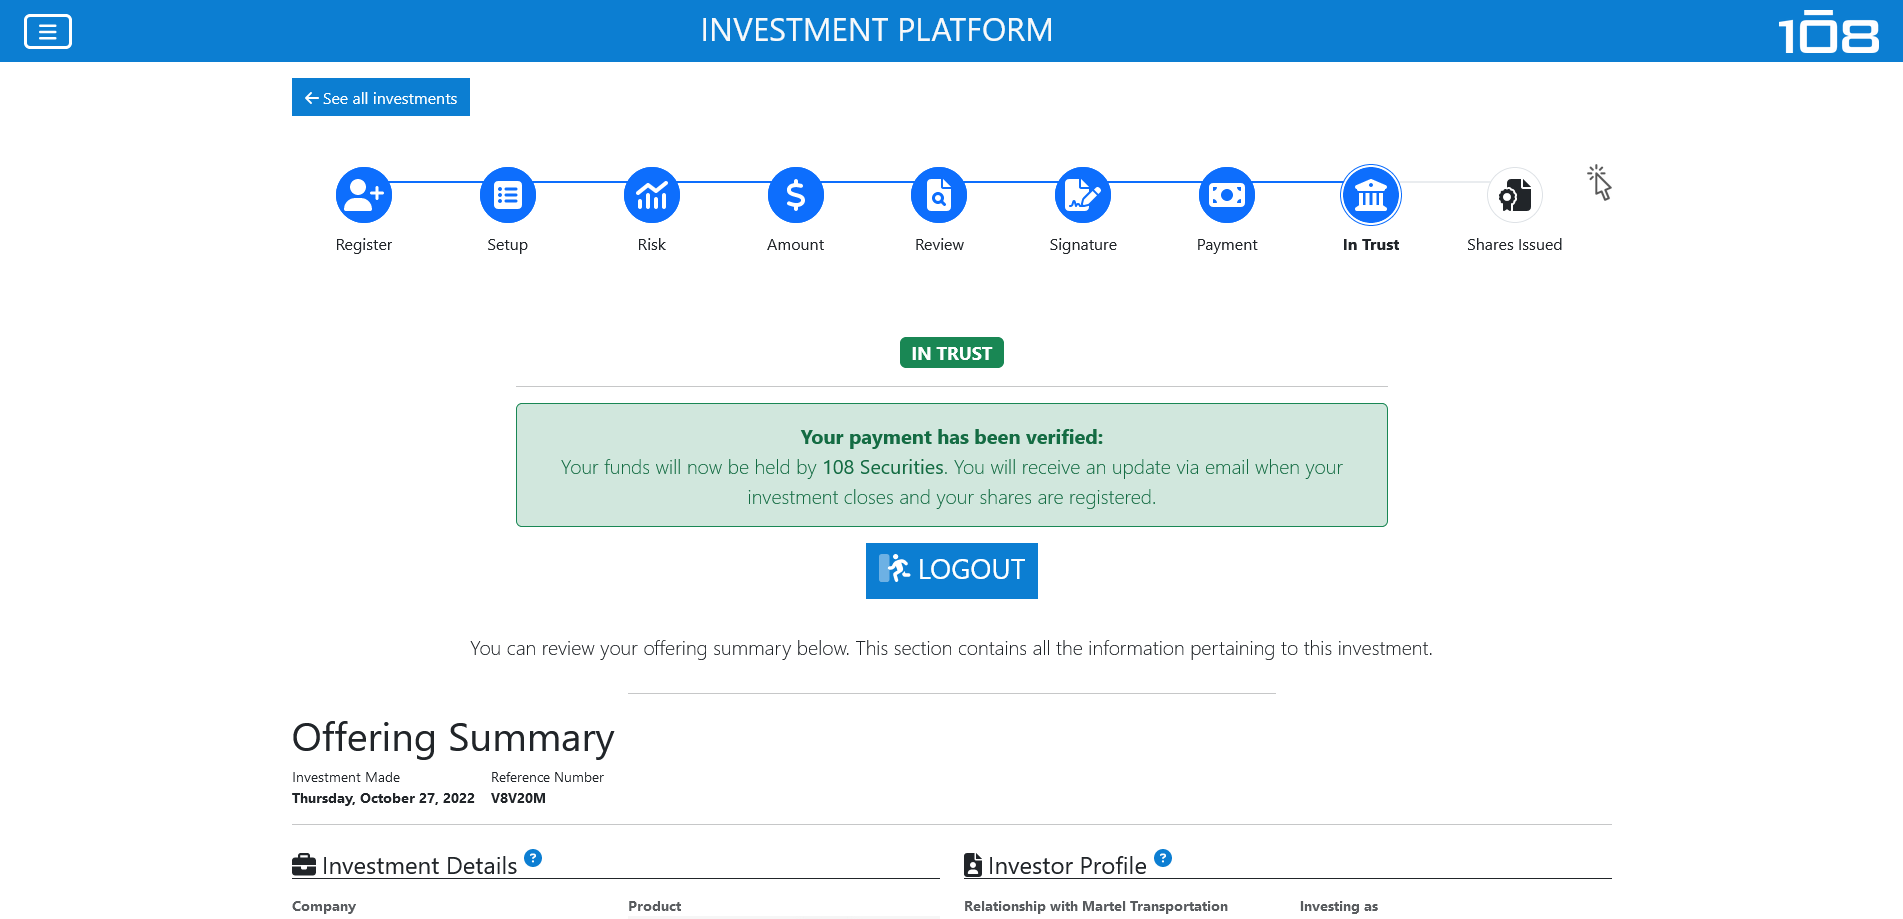 DragonInvest investment details page